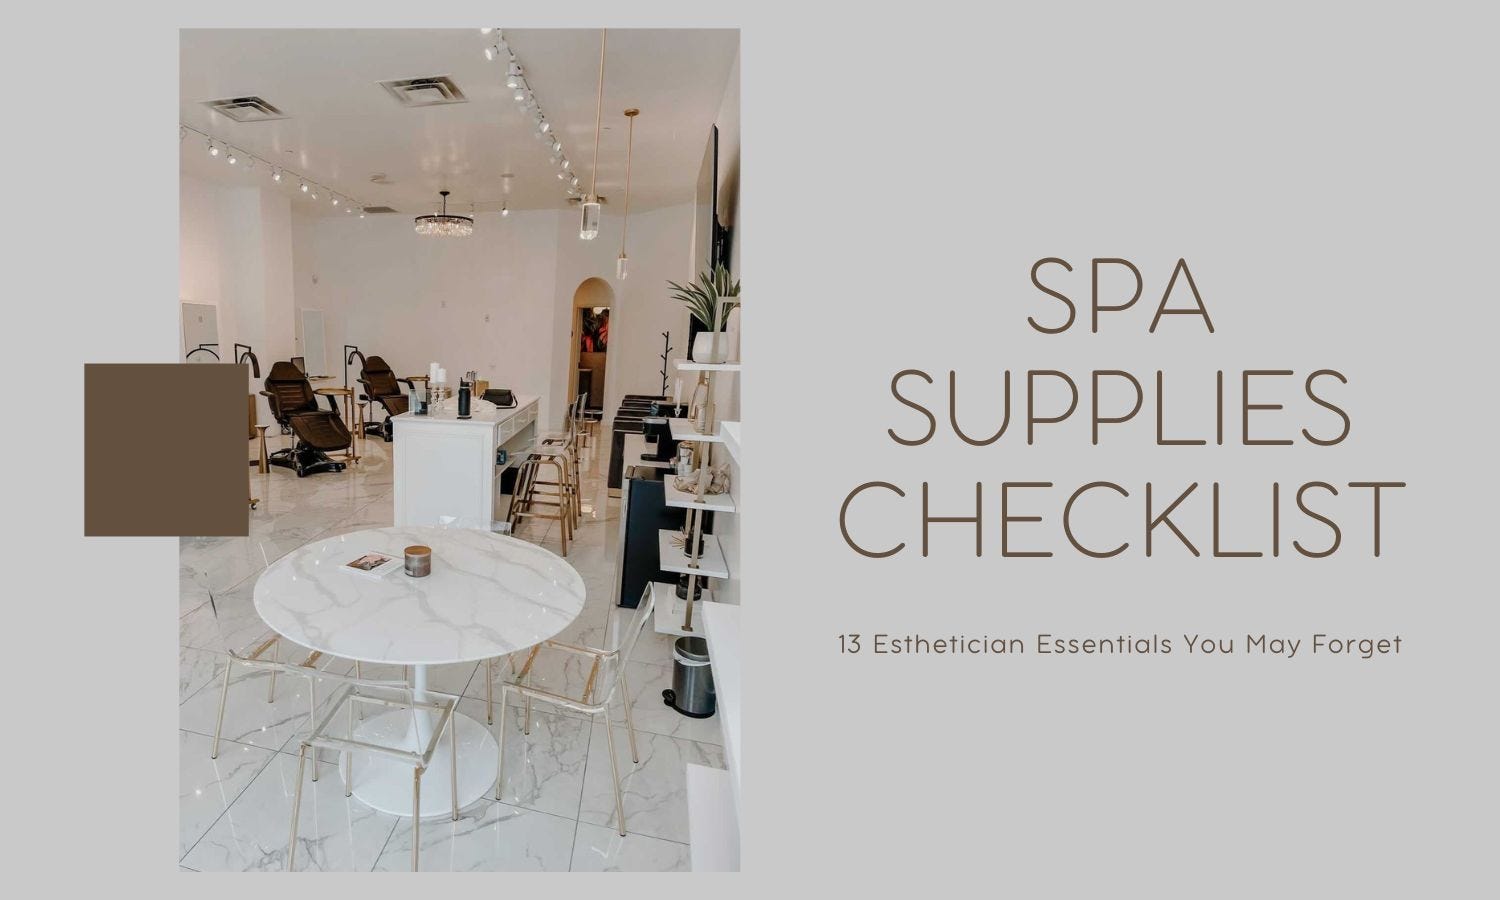 Spa Checklist: 13 Essential Esthetician Supplies You May Forget